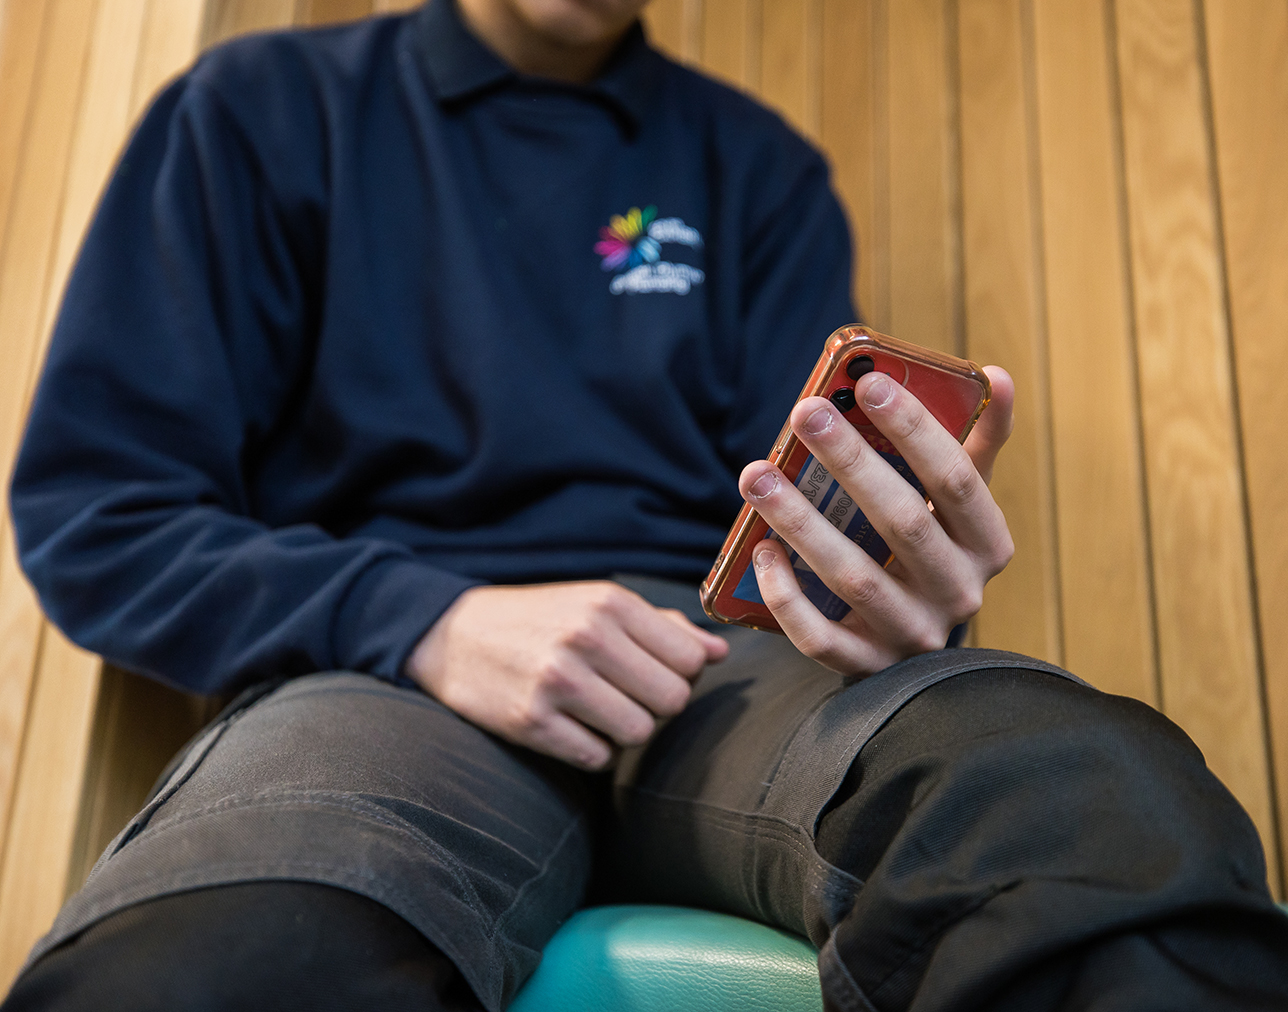 A student sitting down holding their phone wearing a Coleg Cambria jumper